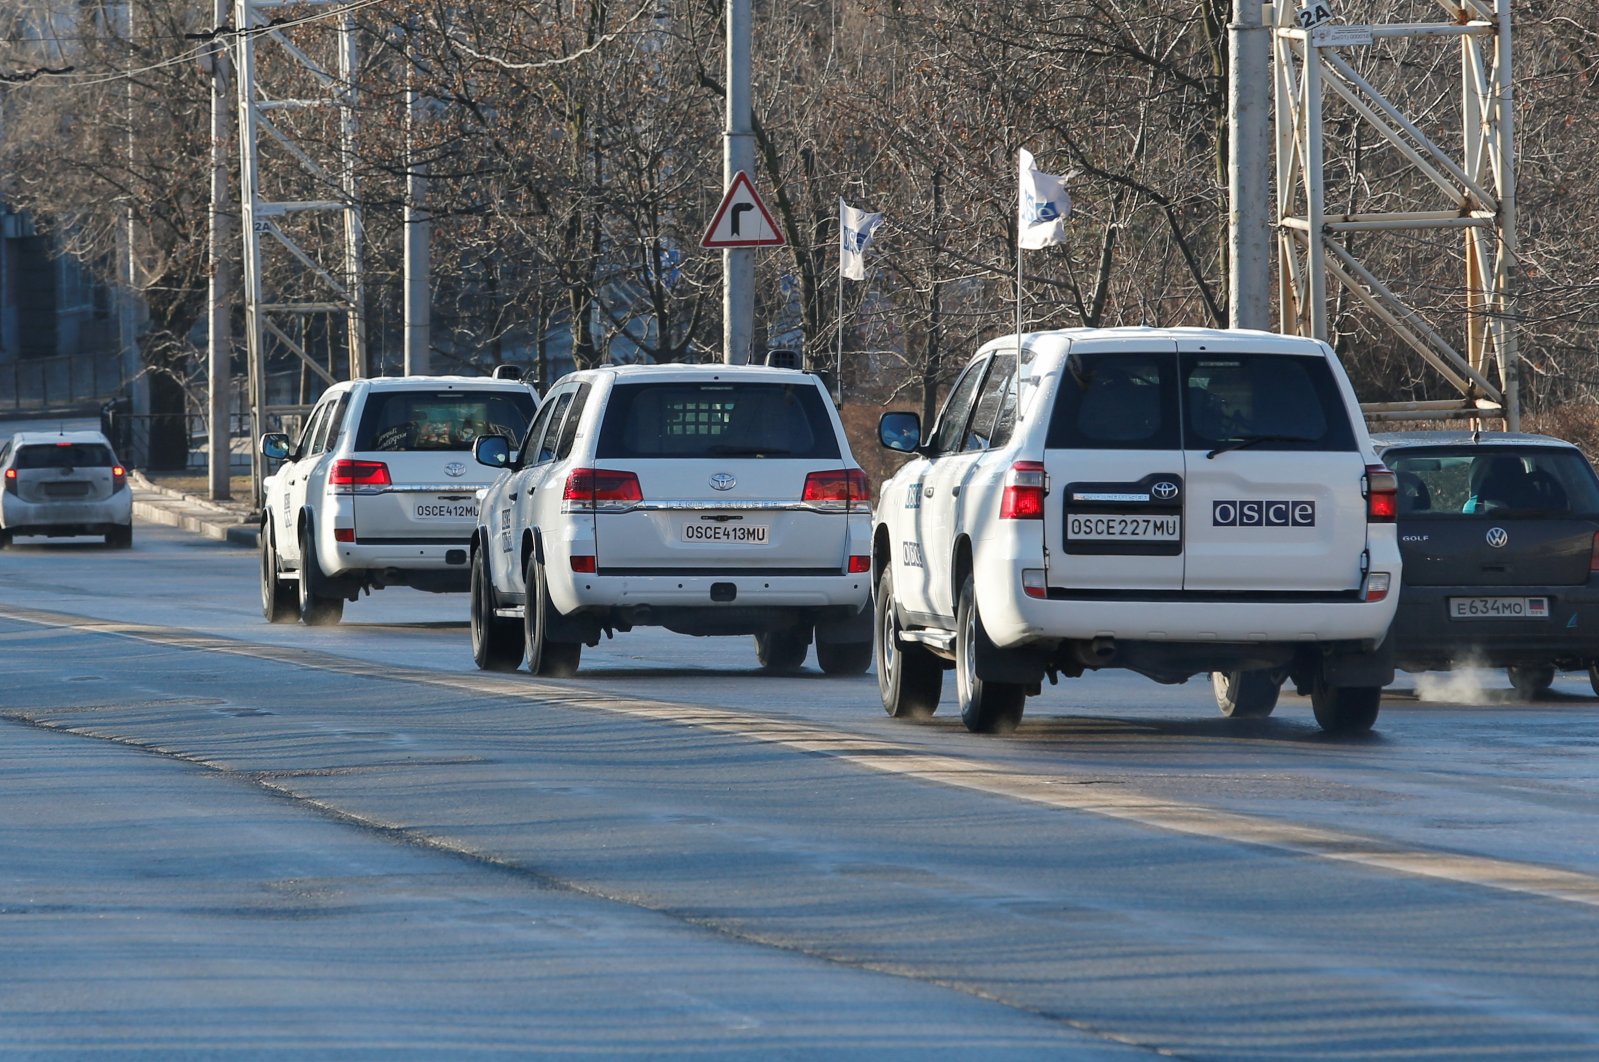 Cars of the Organization for Security and Co-operation in Europe (OSCE) drive along a road after leaving the territory of the Park Inn hotel housing the monitoring mission in the separatist-controlled city of Donetsk, Ukraine, Feb. 13, 2022. (Reuters Photo)